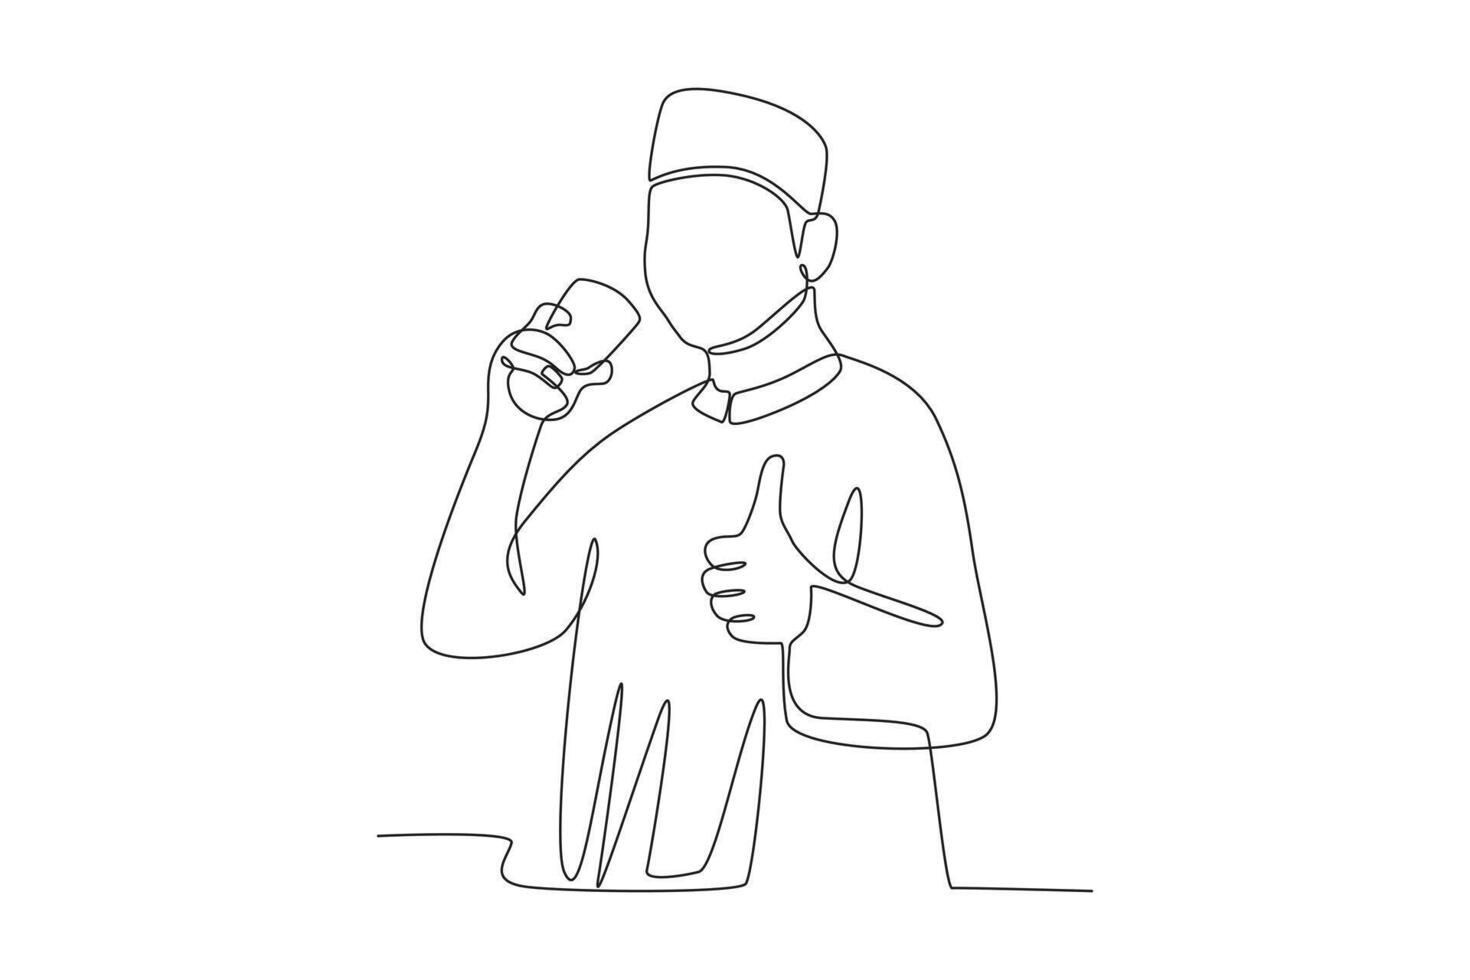 A man is posing while drinking vector